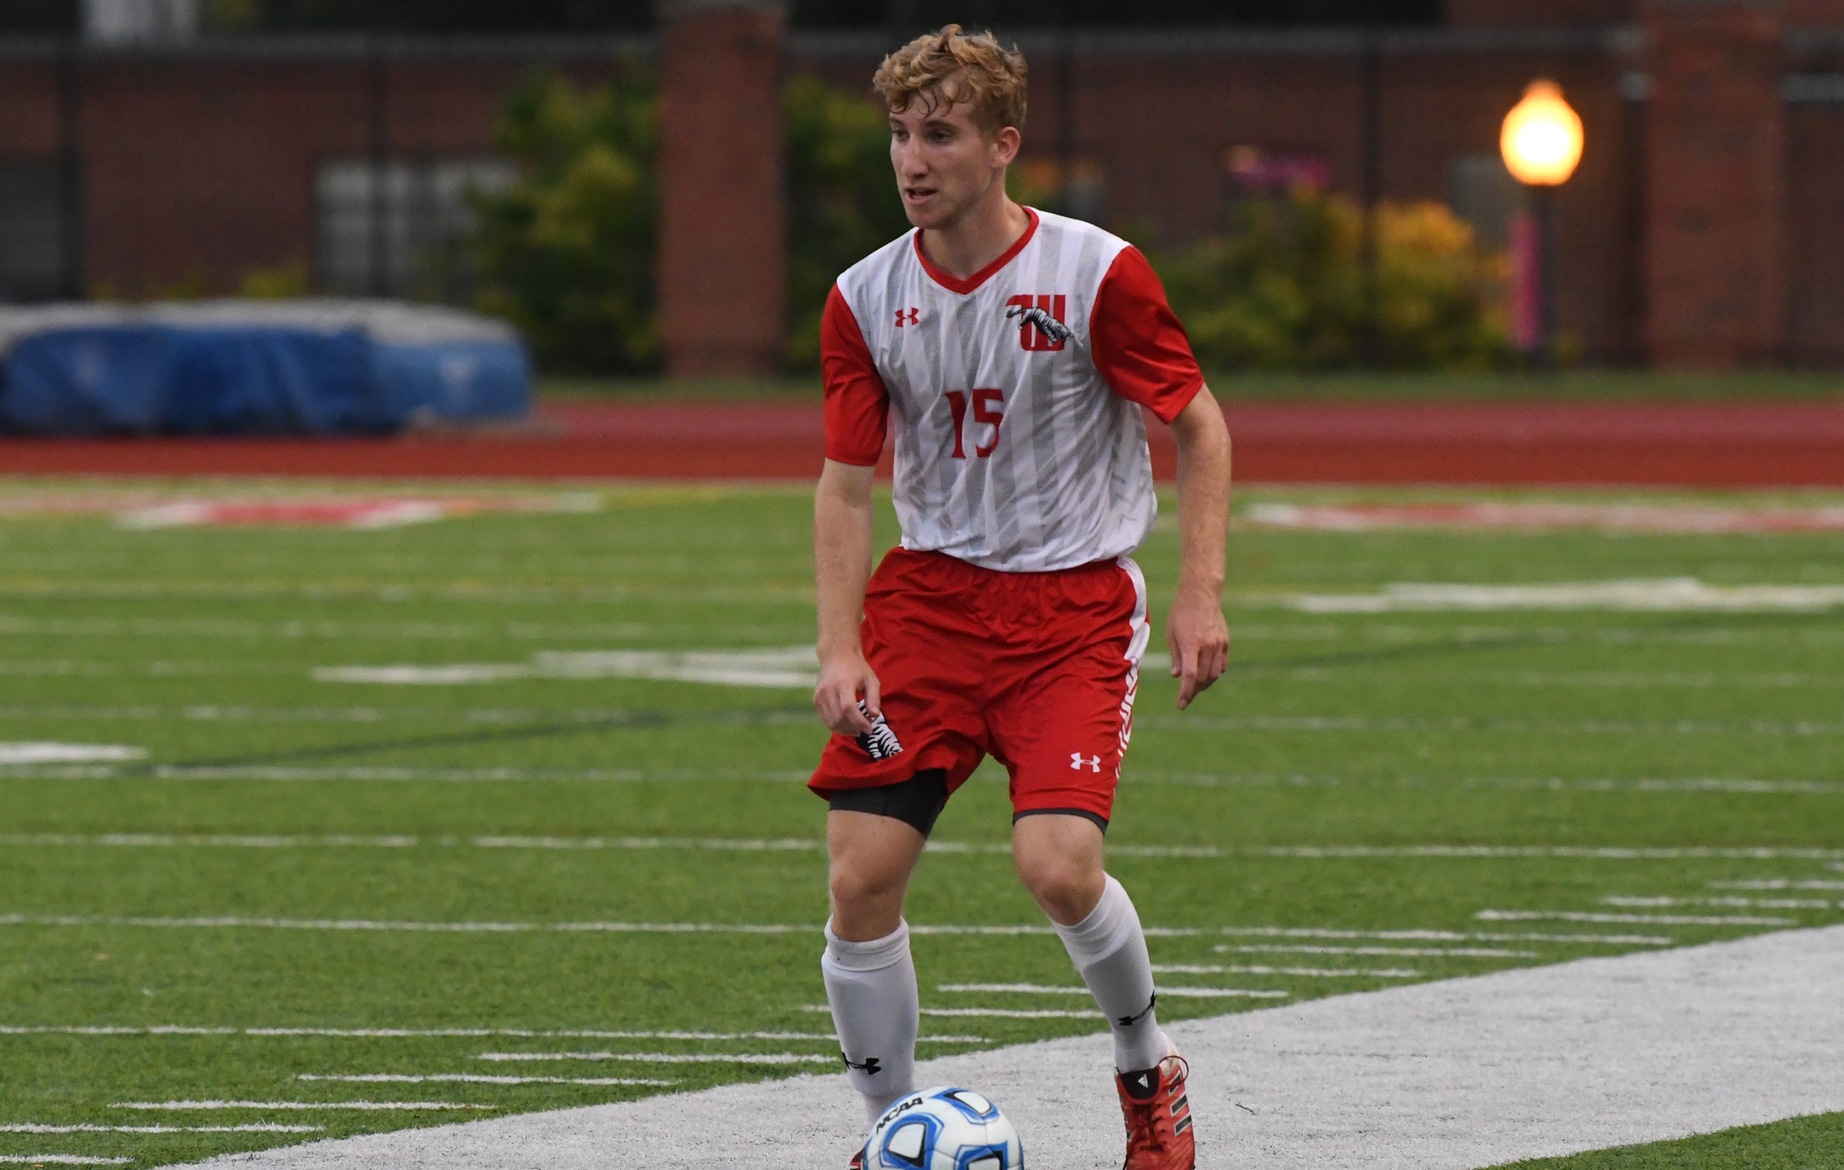 Junior Jack Smith bolstered a strong defensive effort in Wittenberg's narrow 1-0 loss against No. 5 Calvin